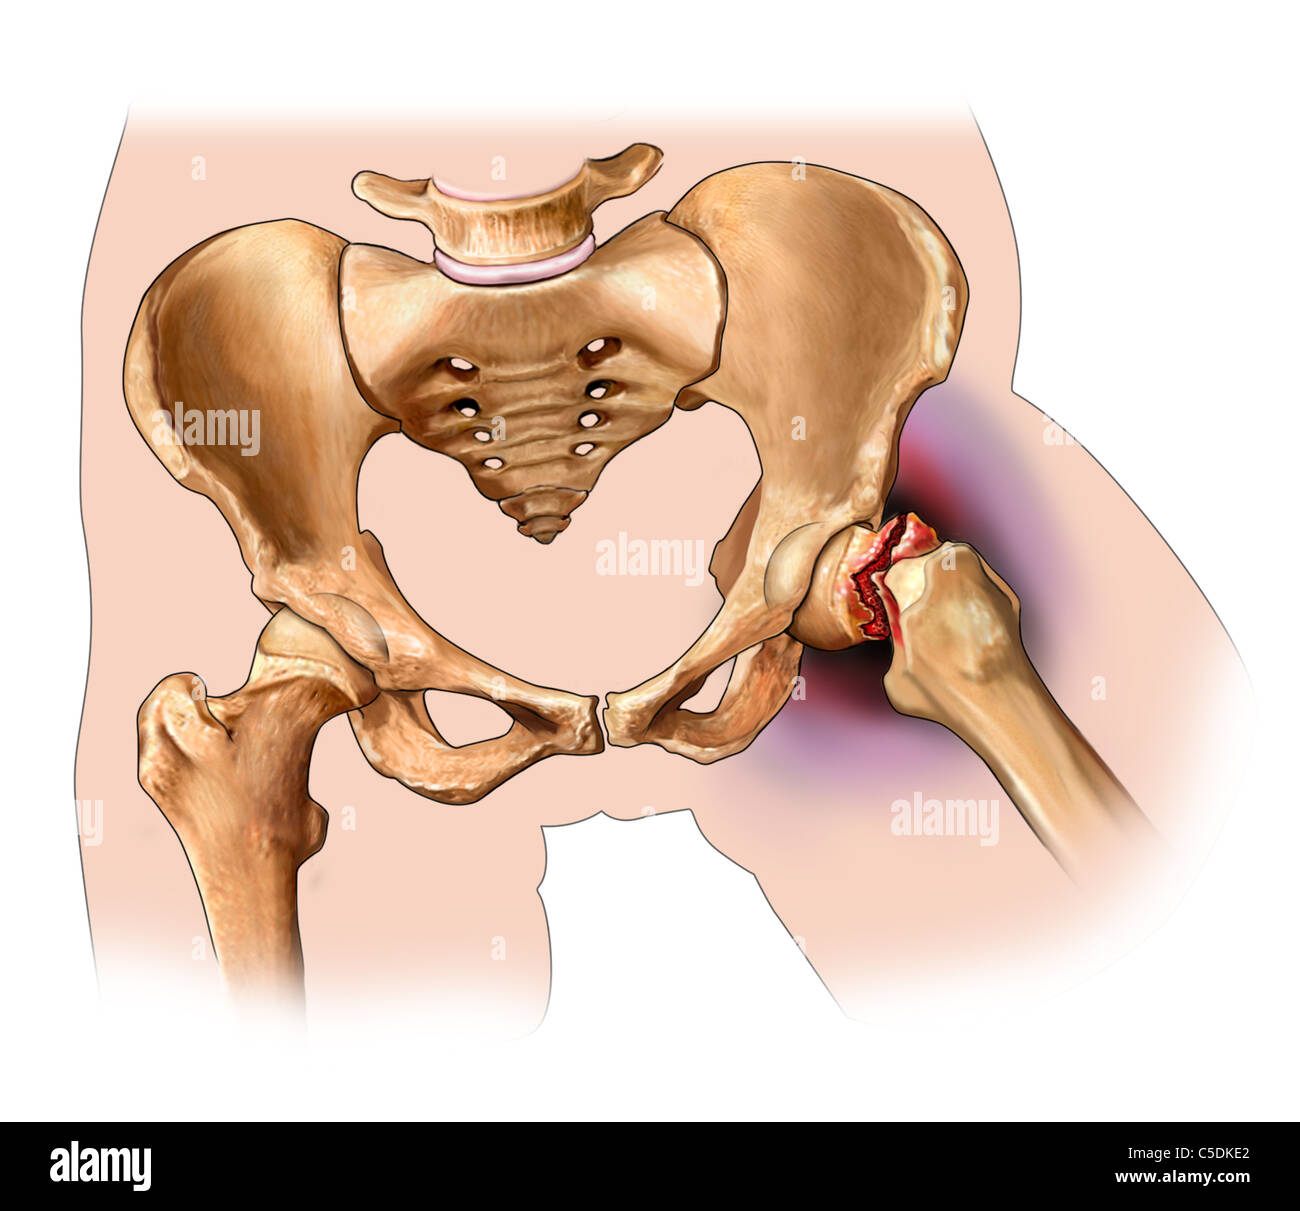 Femoral neck fracture Stock Photo